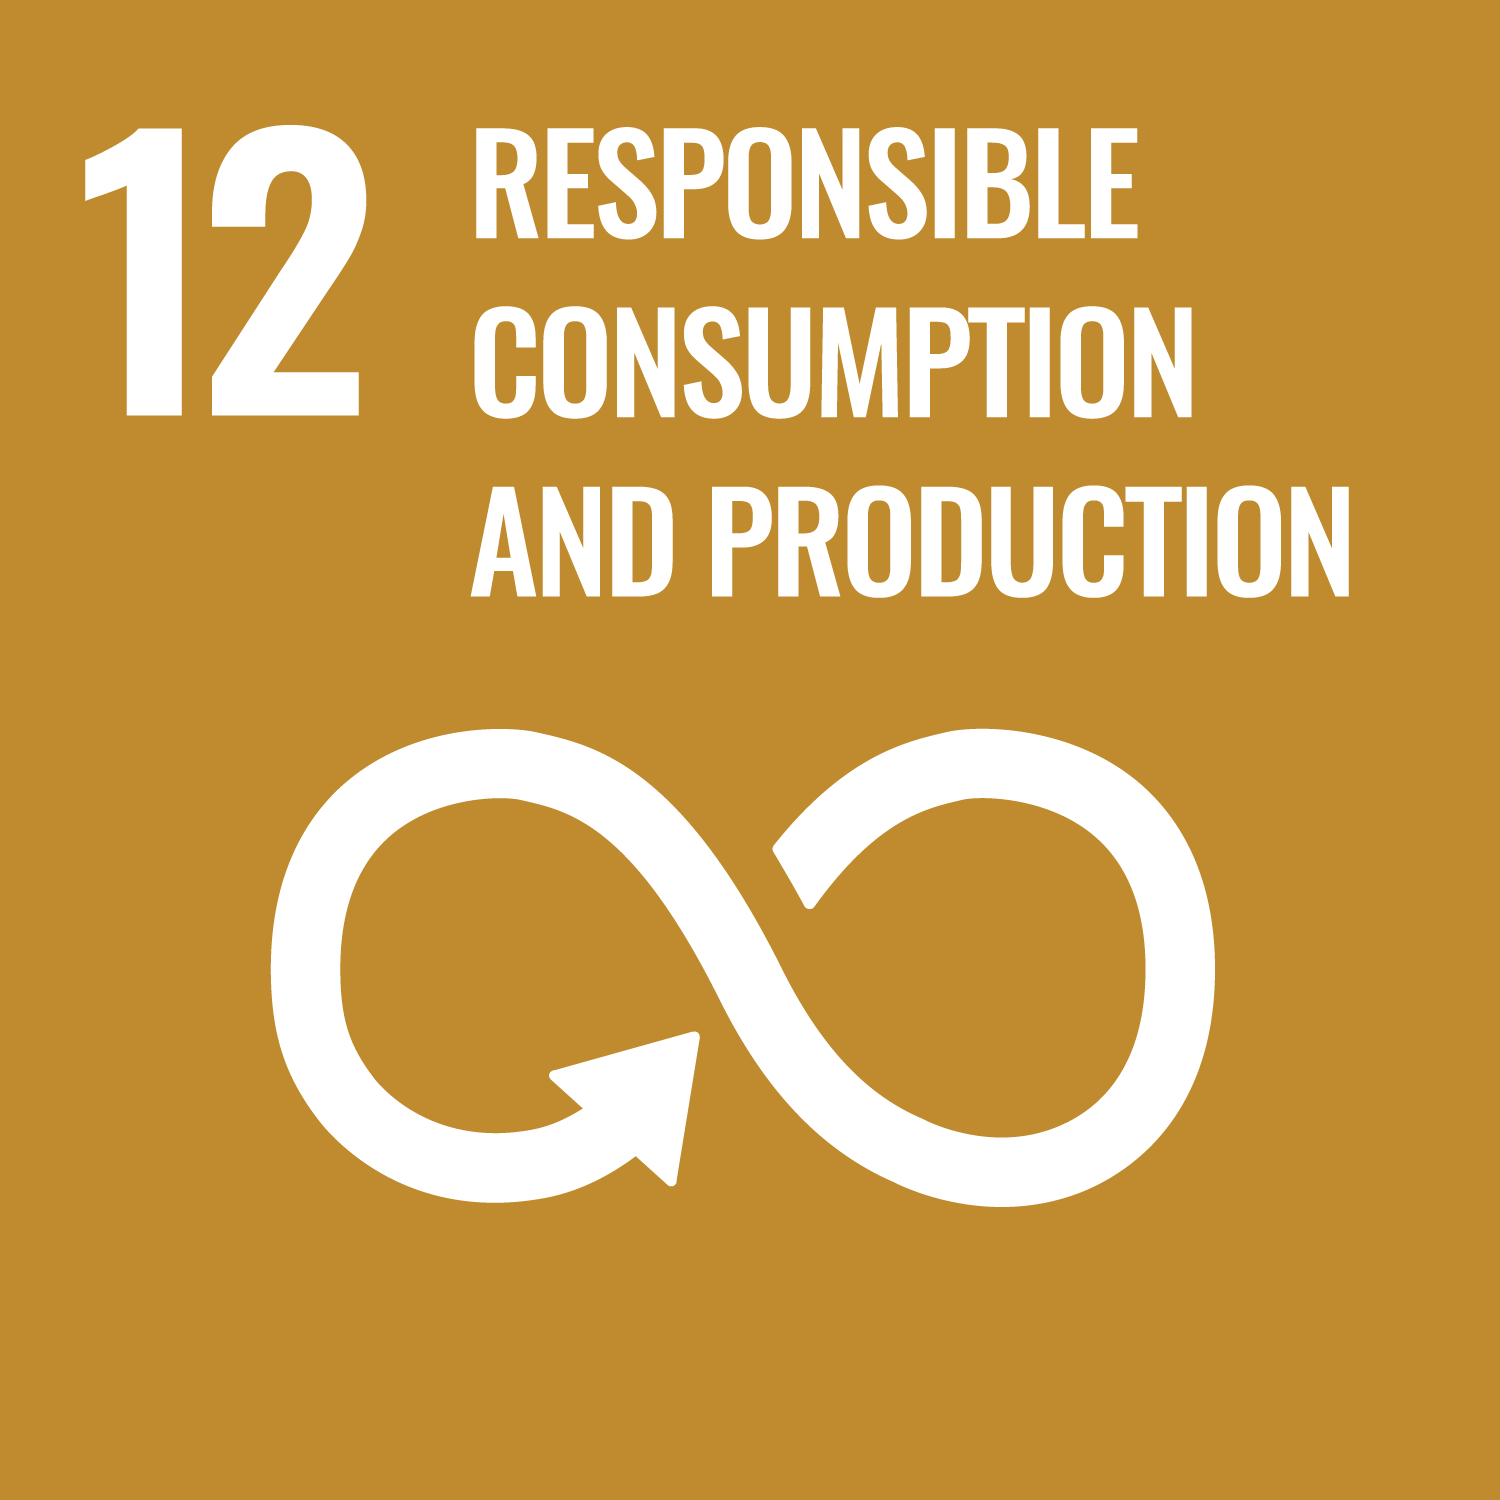 Goal 12: Responsible consuption and production